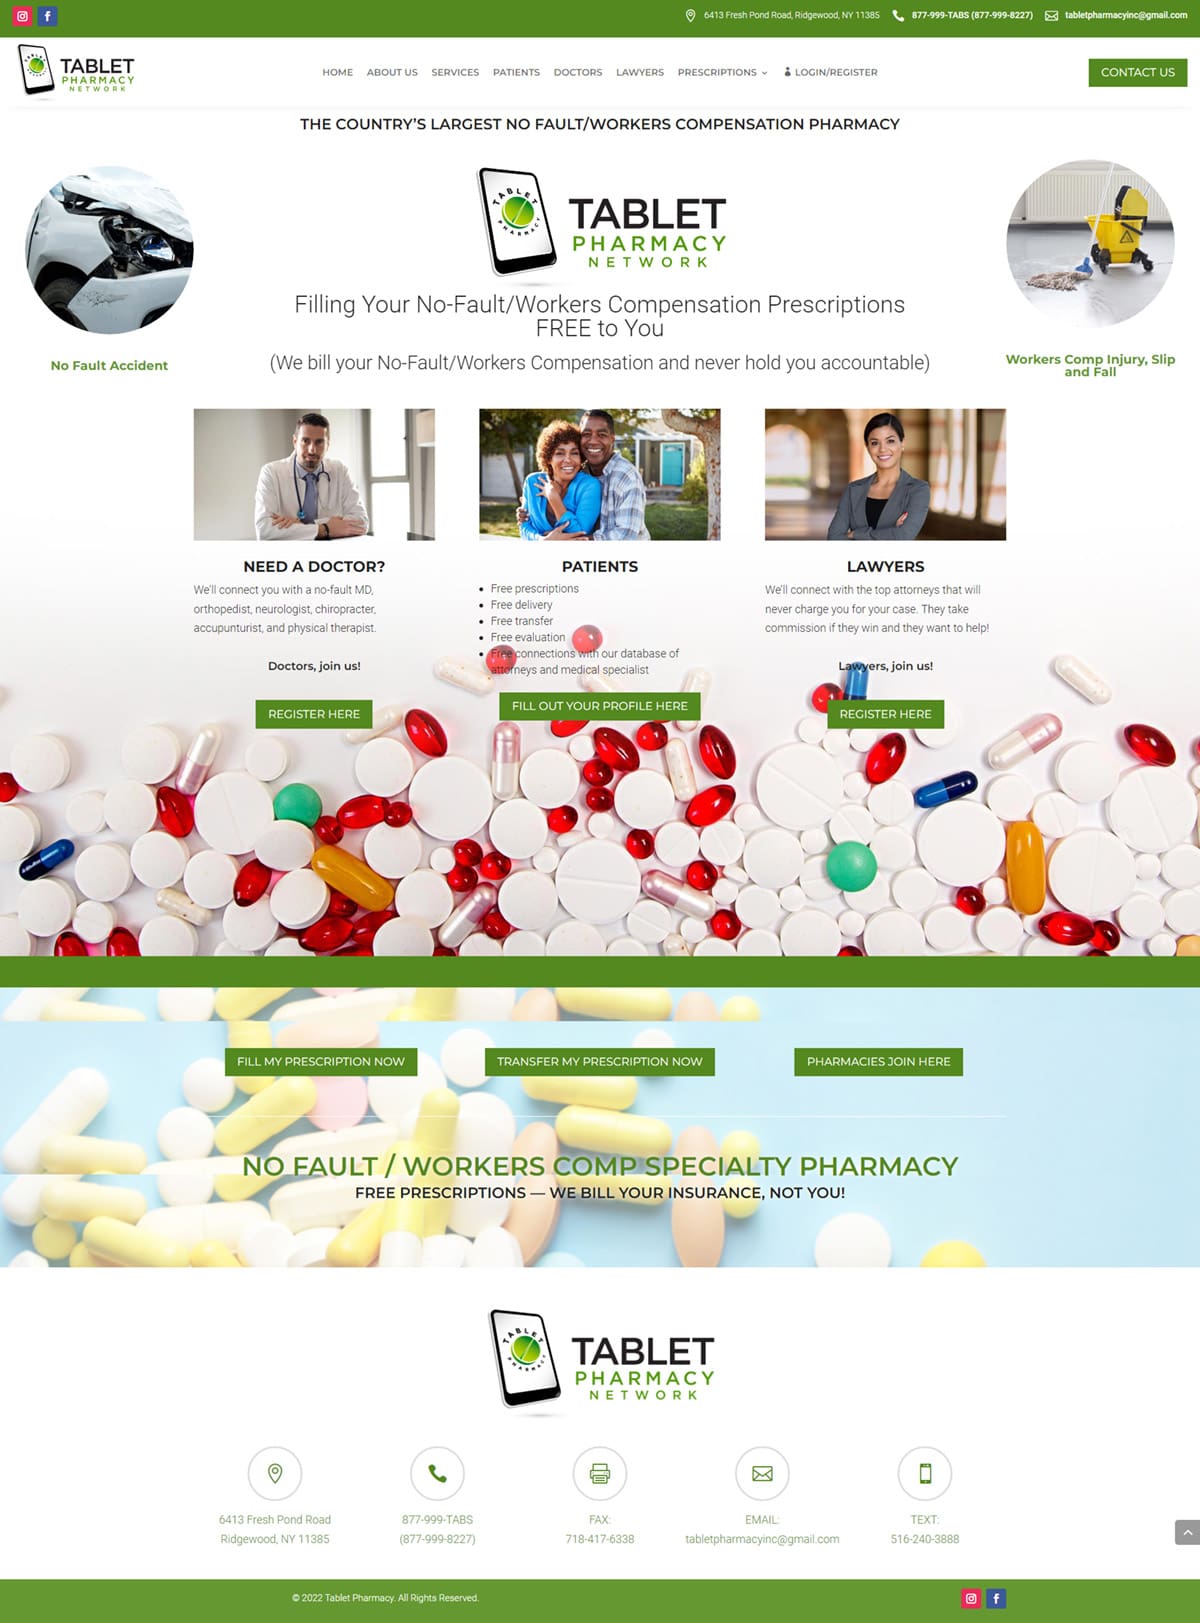 No Fault / Workers Compensation Pharmacy Website